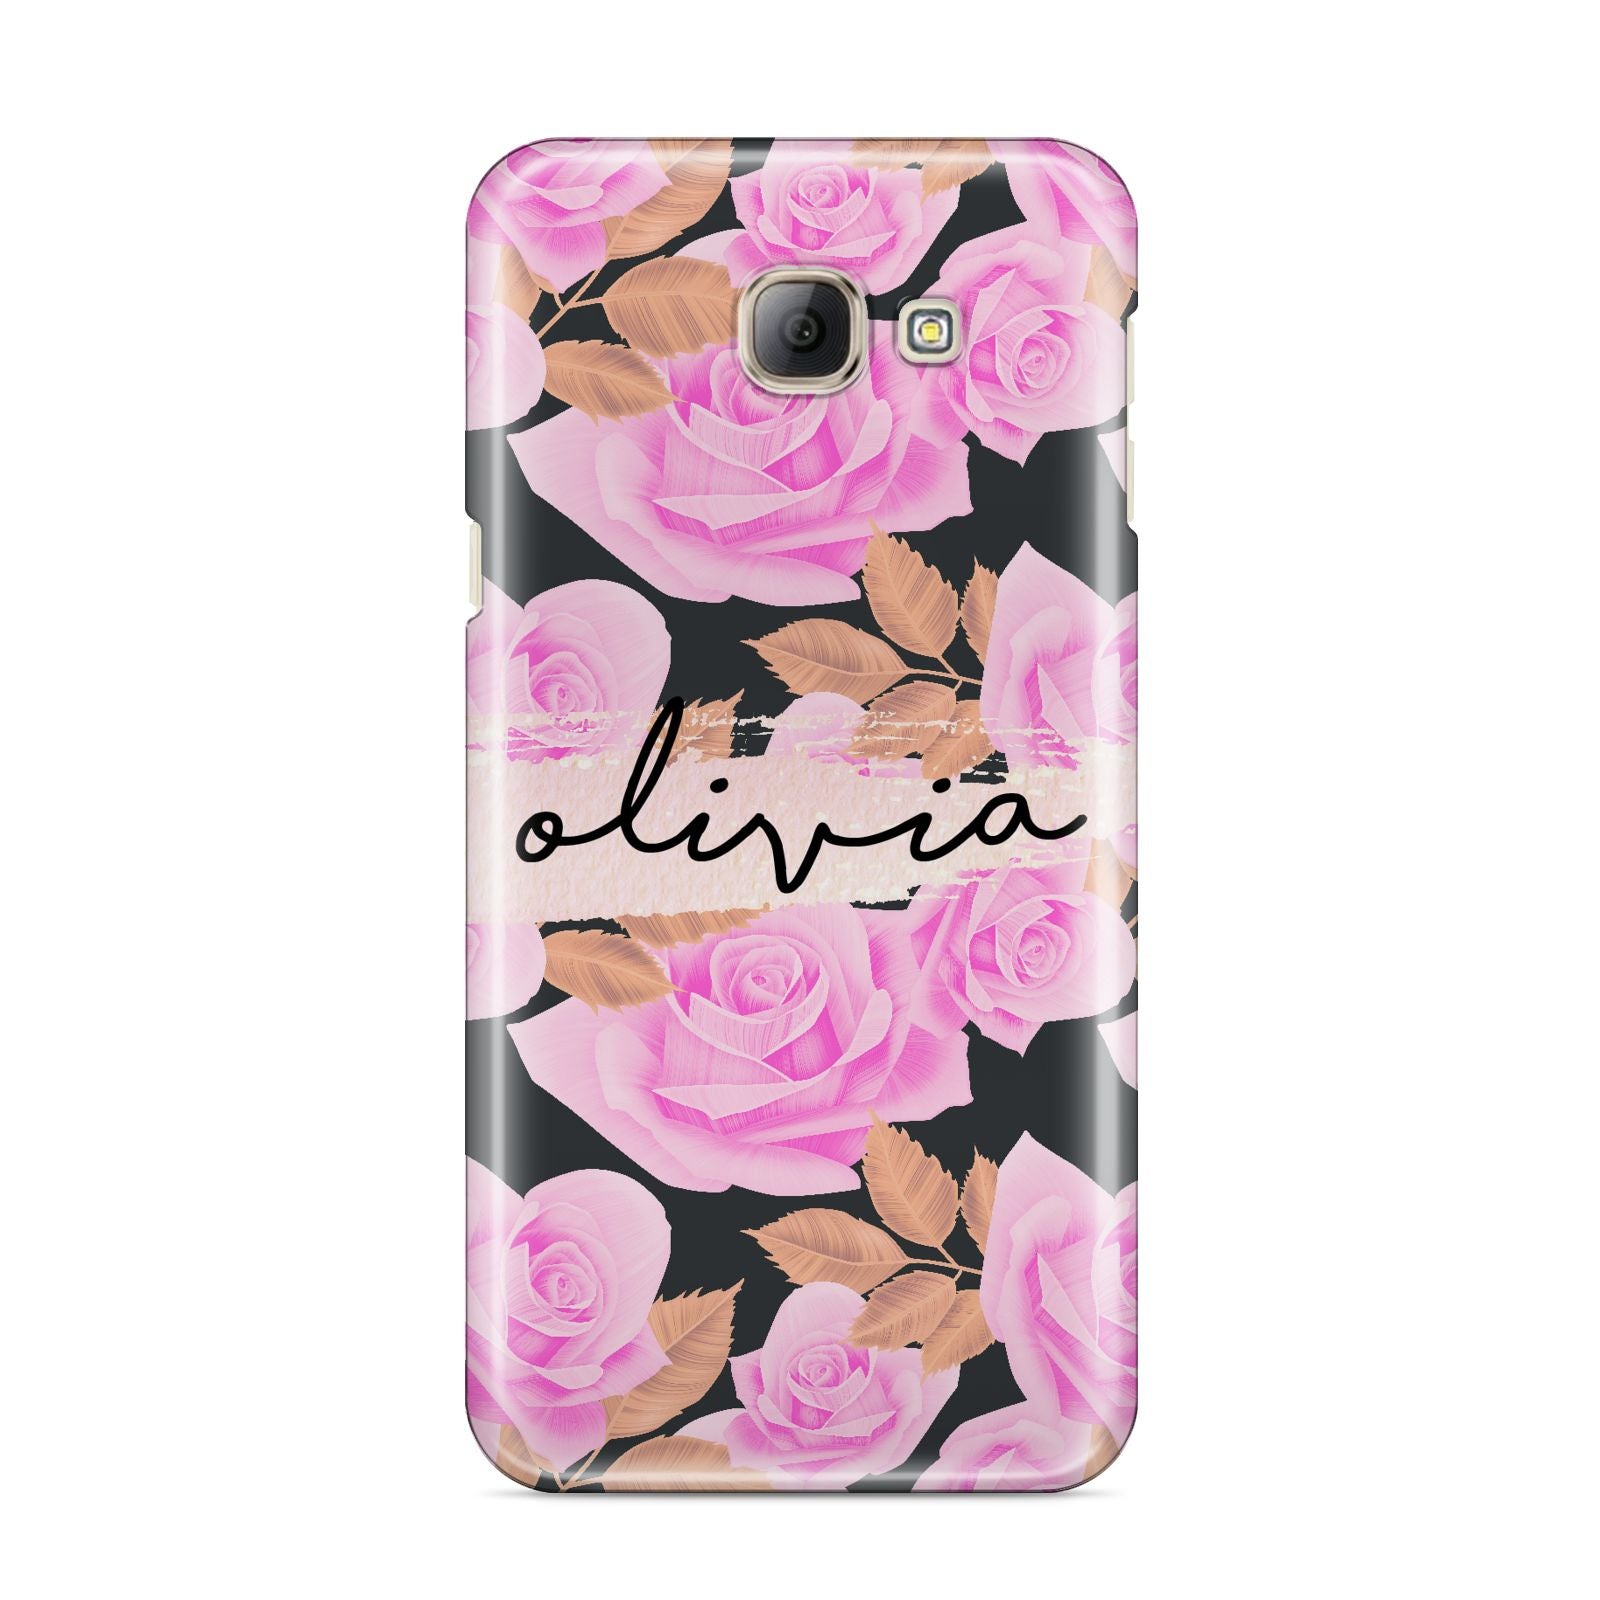 Personalised Floral Pink Roses Samsung Galaxy A8 2016 Case